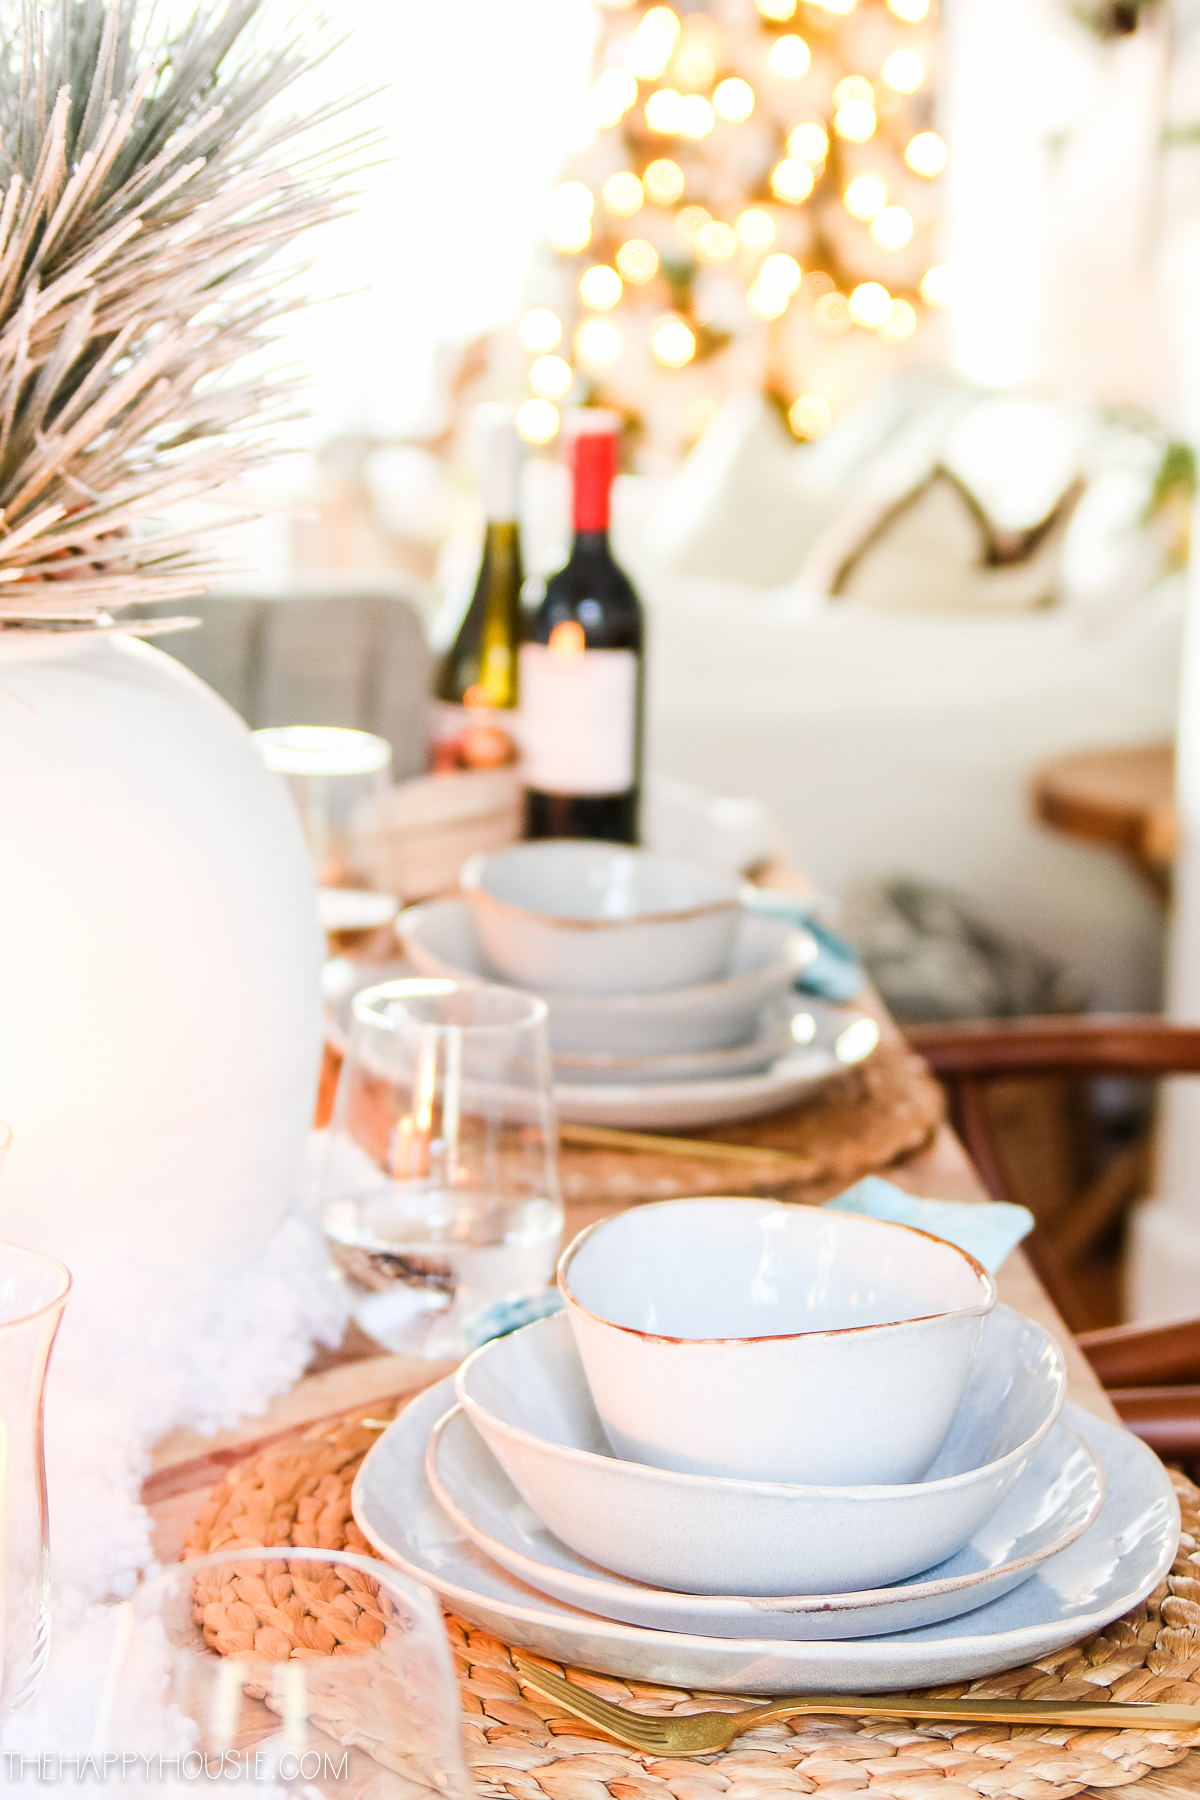 Winter Holiday New Year’s Eve Table Decor Ideas